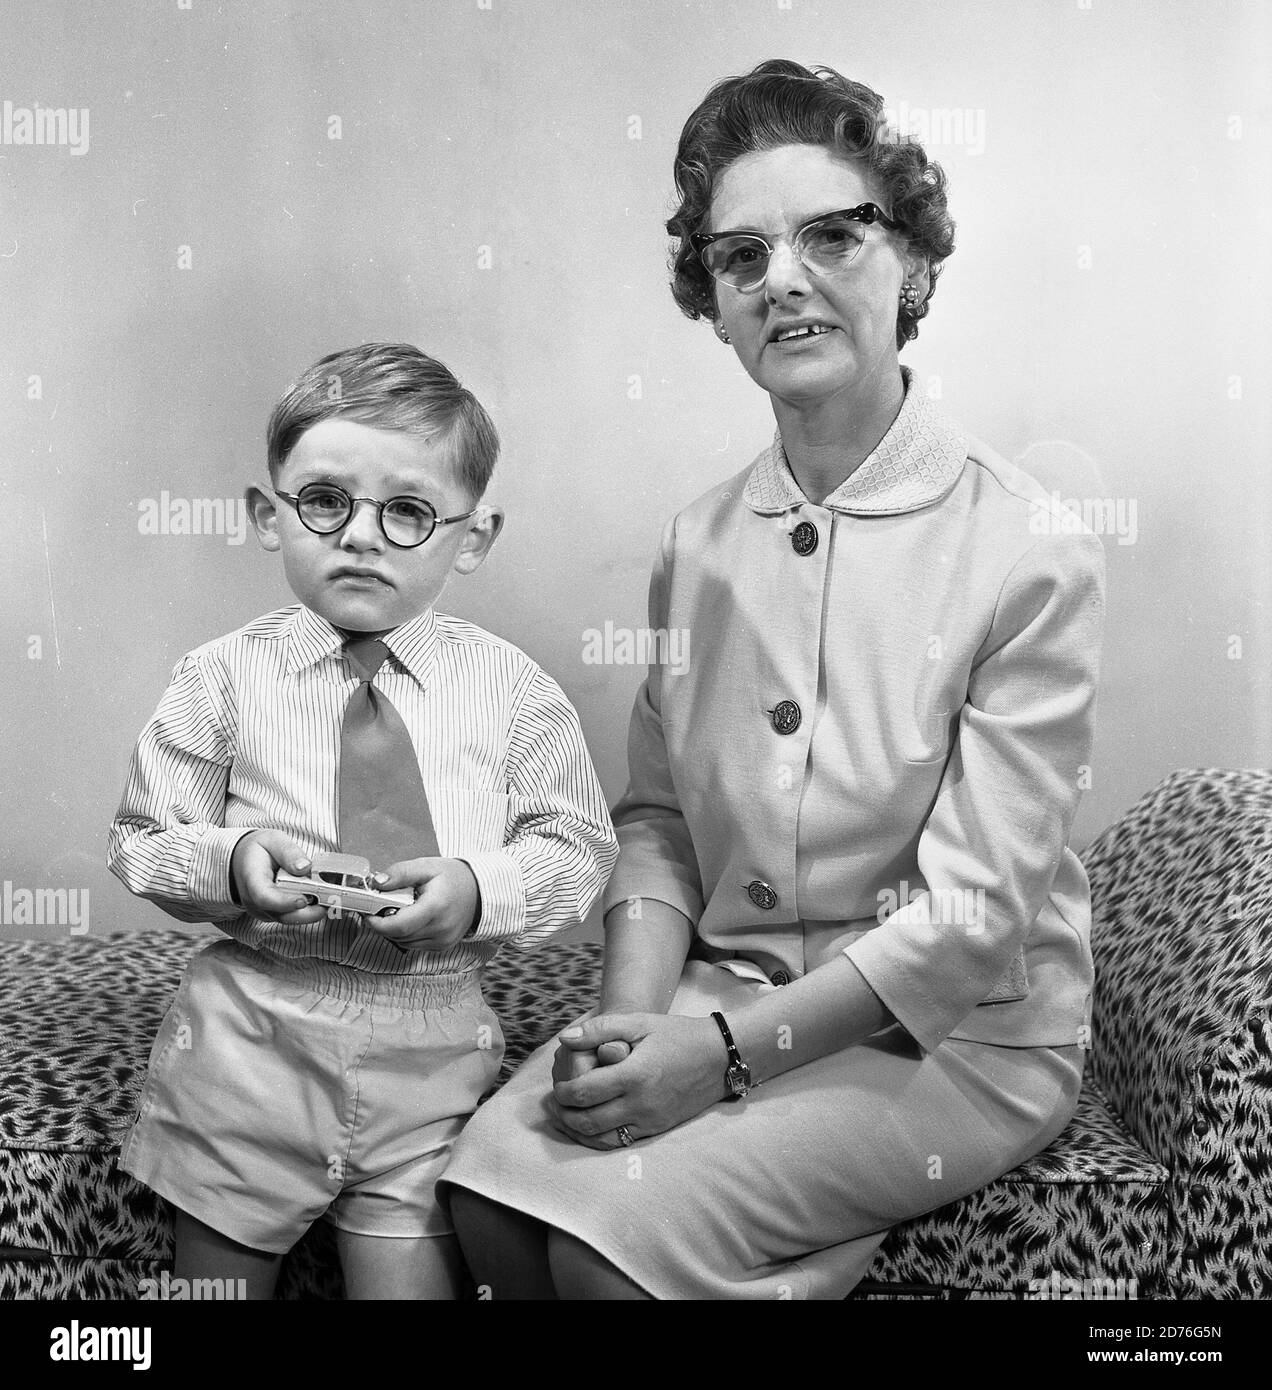 1960s, historical, like mother, like son! little boy with small round glasses and holding his toy metal car in his hands standing next to his mother, who is also wearing a pair of spectacles, that were one of the popular female styles this era, England, UK. Stock Photo